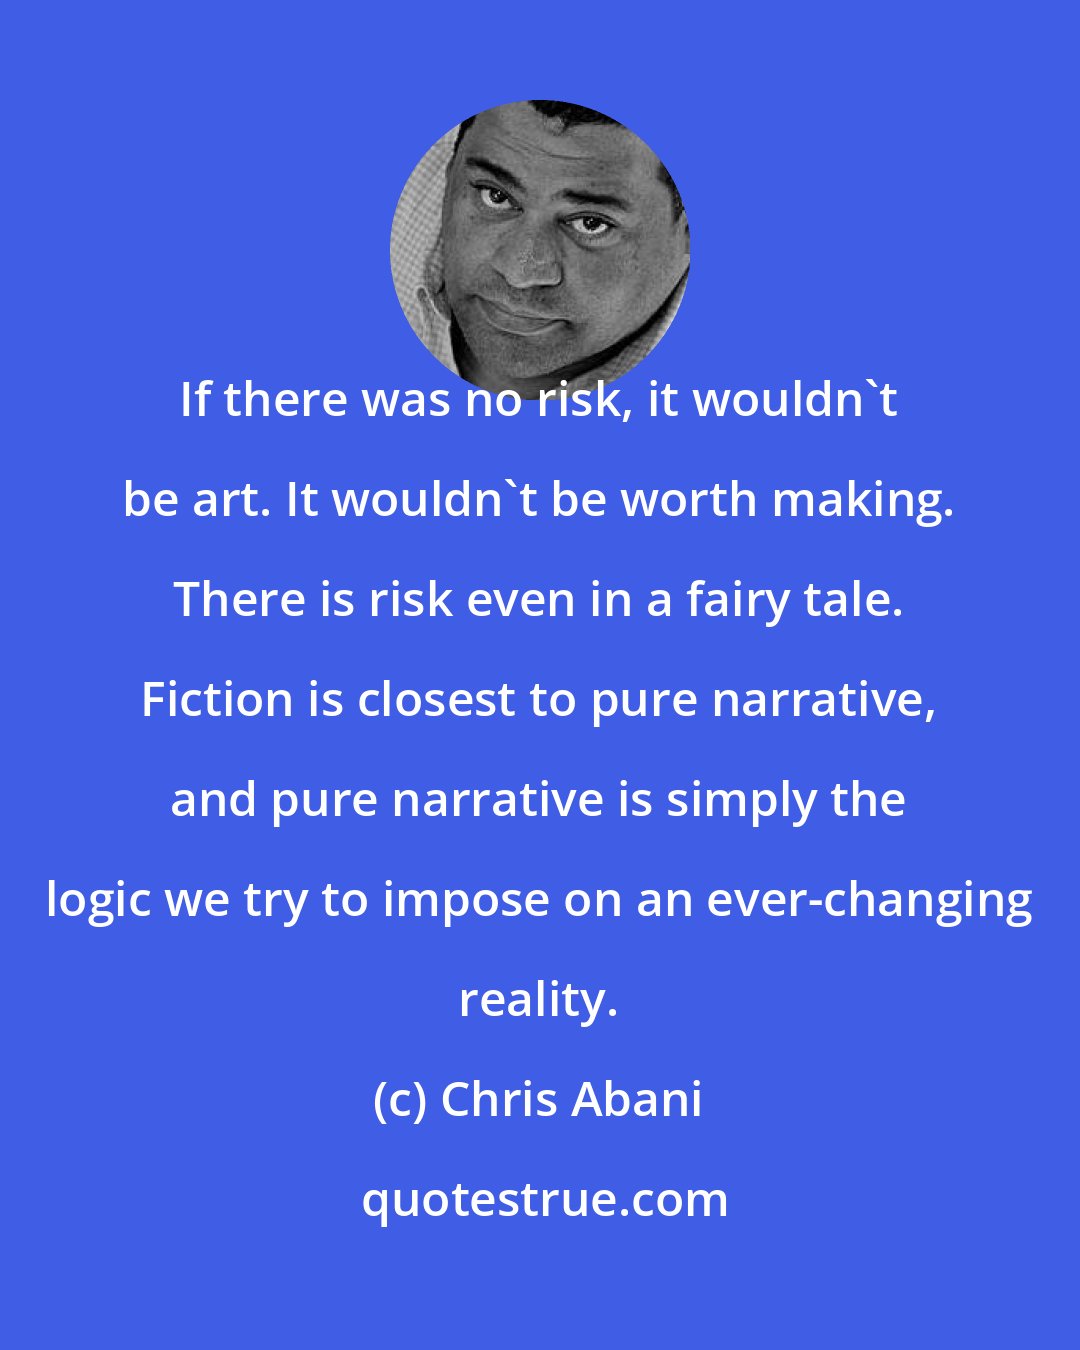 Chris Abani: If there was no risk, it wouldn't be art. It wouldn't be worth making. There is risk even in a fairy tale. Fiction is closest to pure narrative, and pure narrative is simply the logic we try to impose on an ever-changing reality.